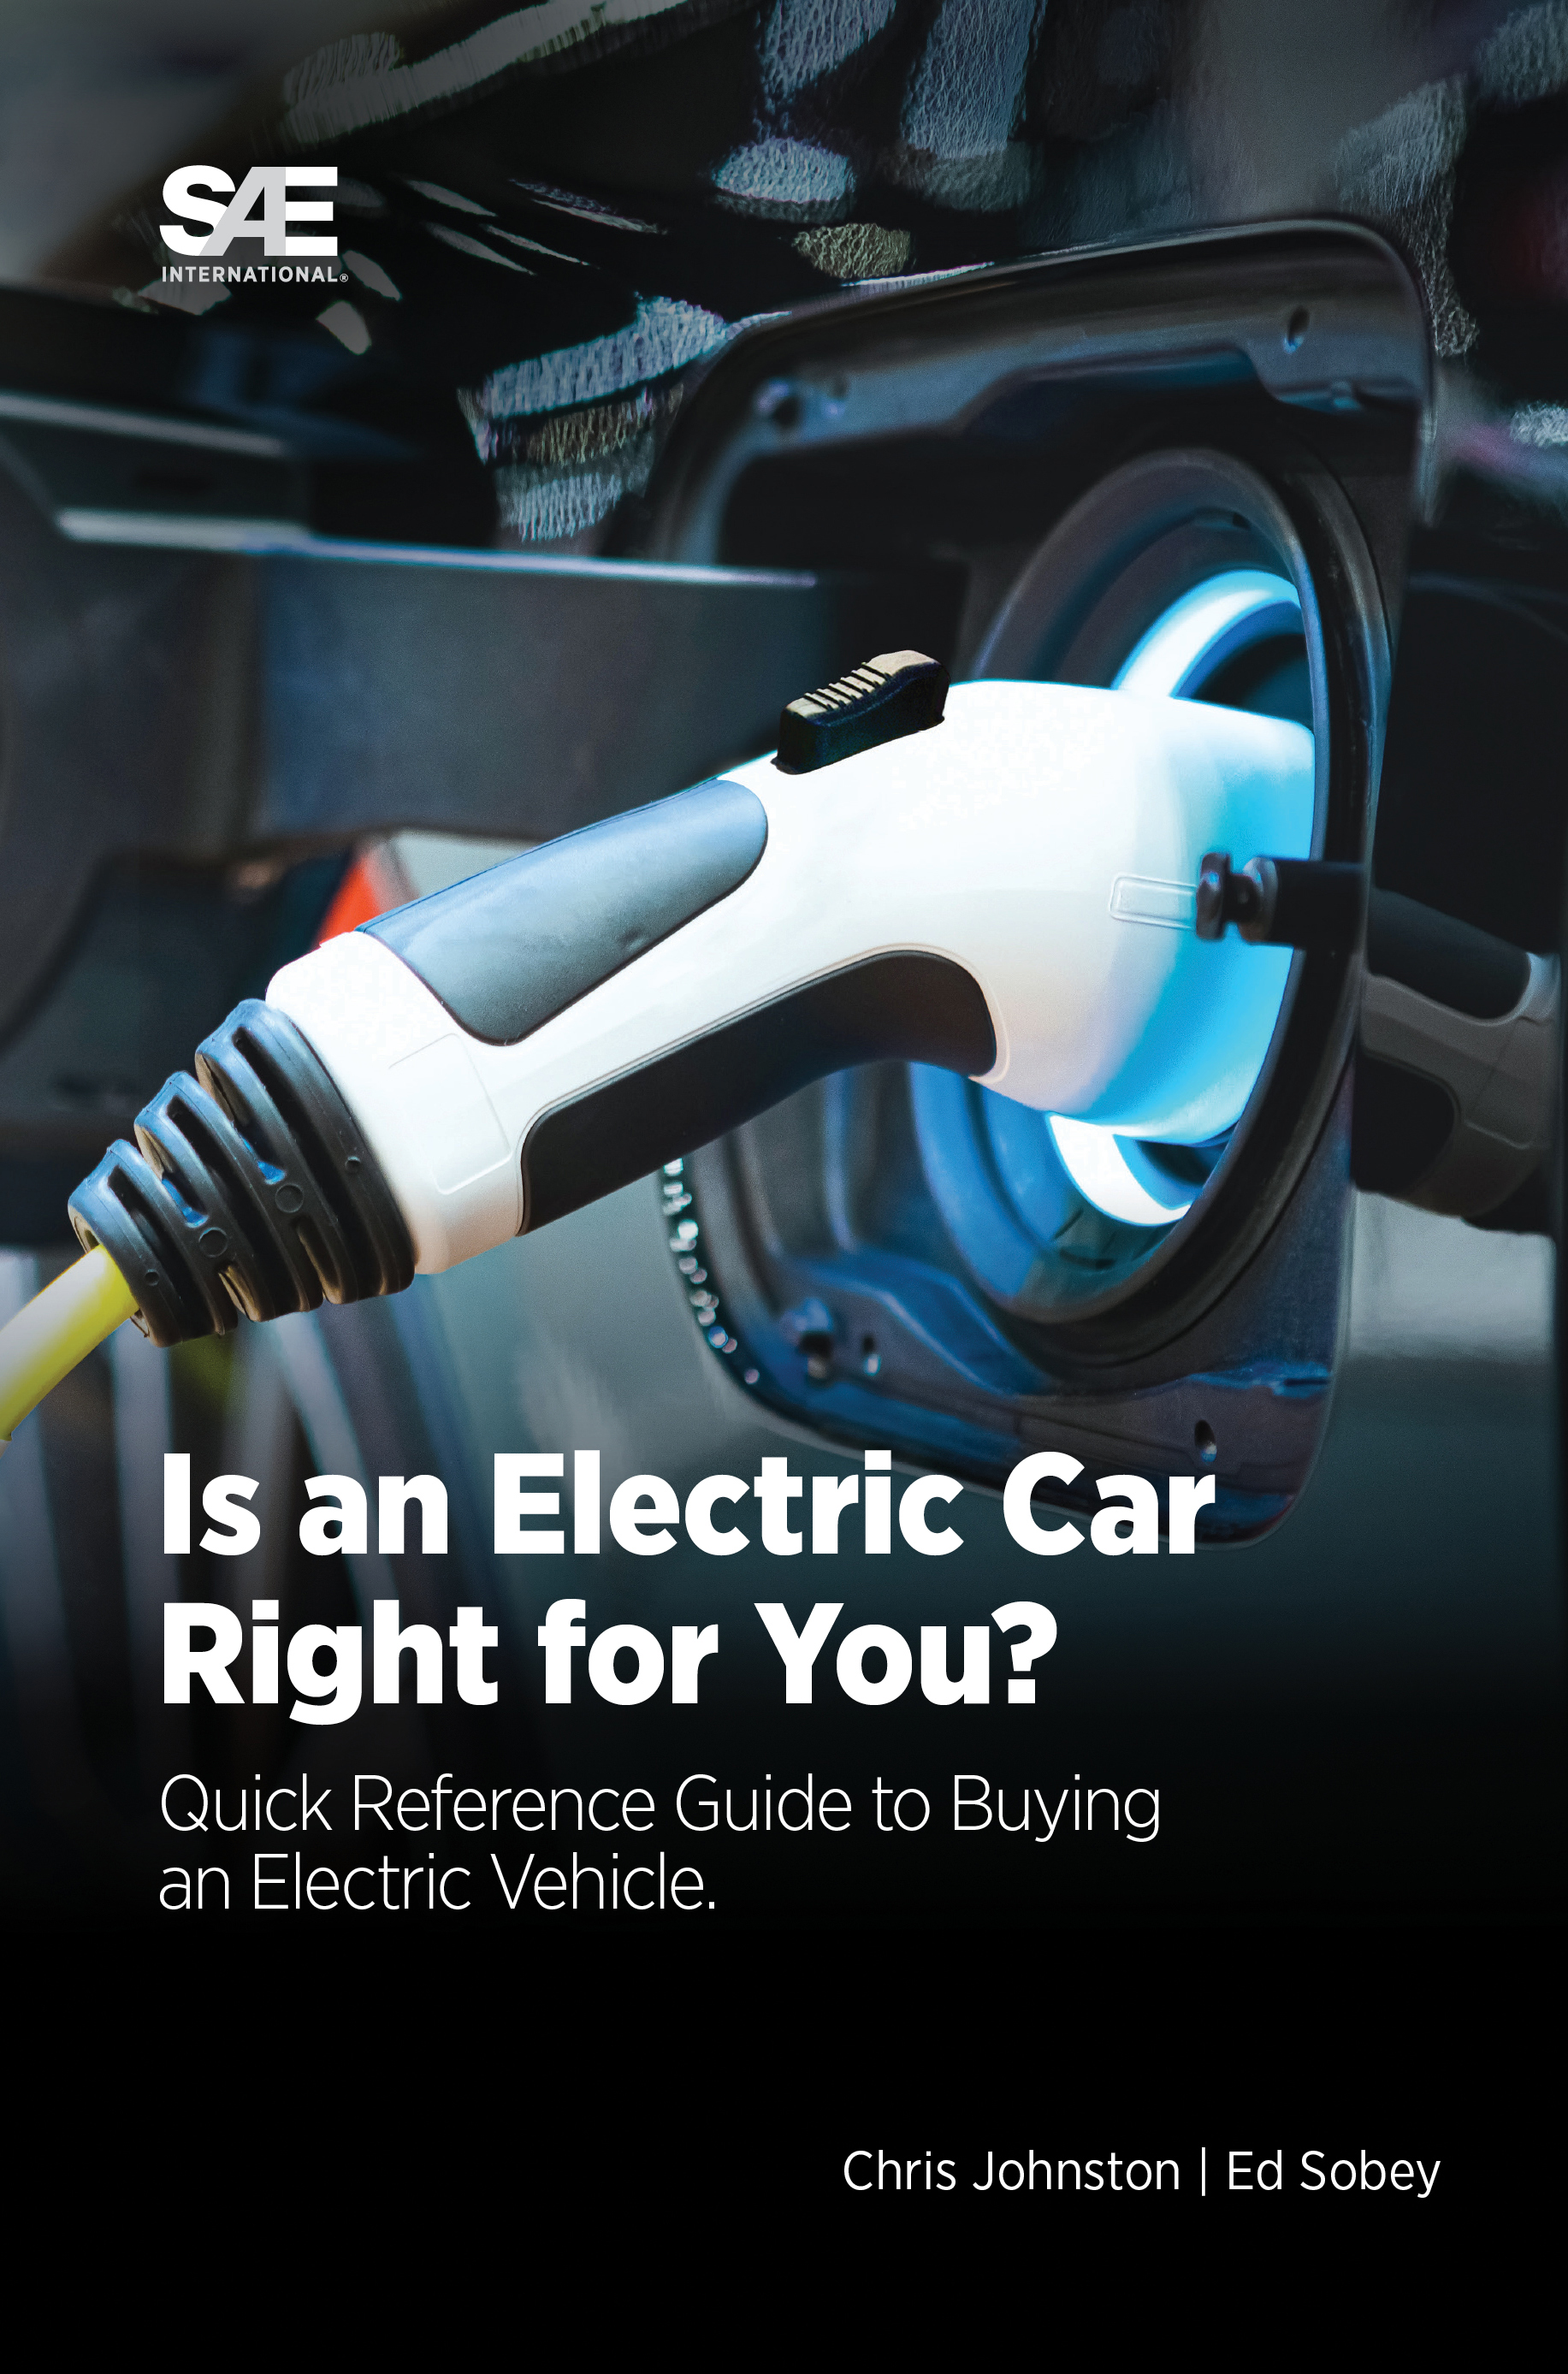 is an electric car right for you book cover.jpg